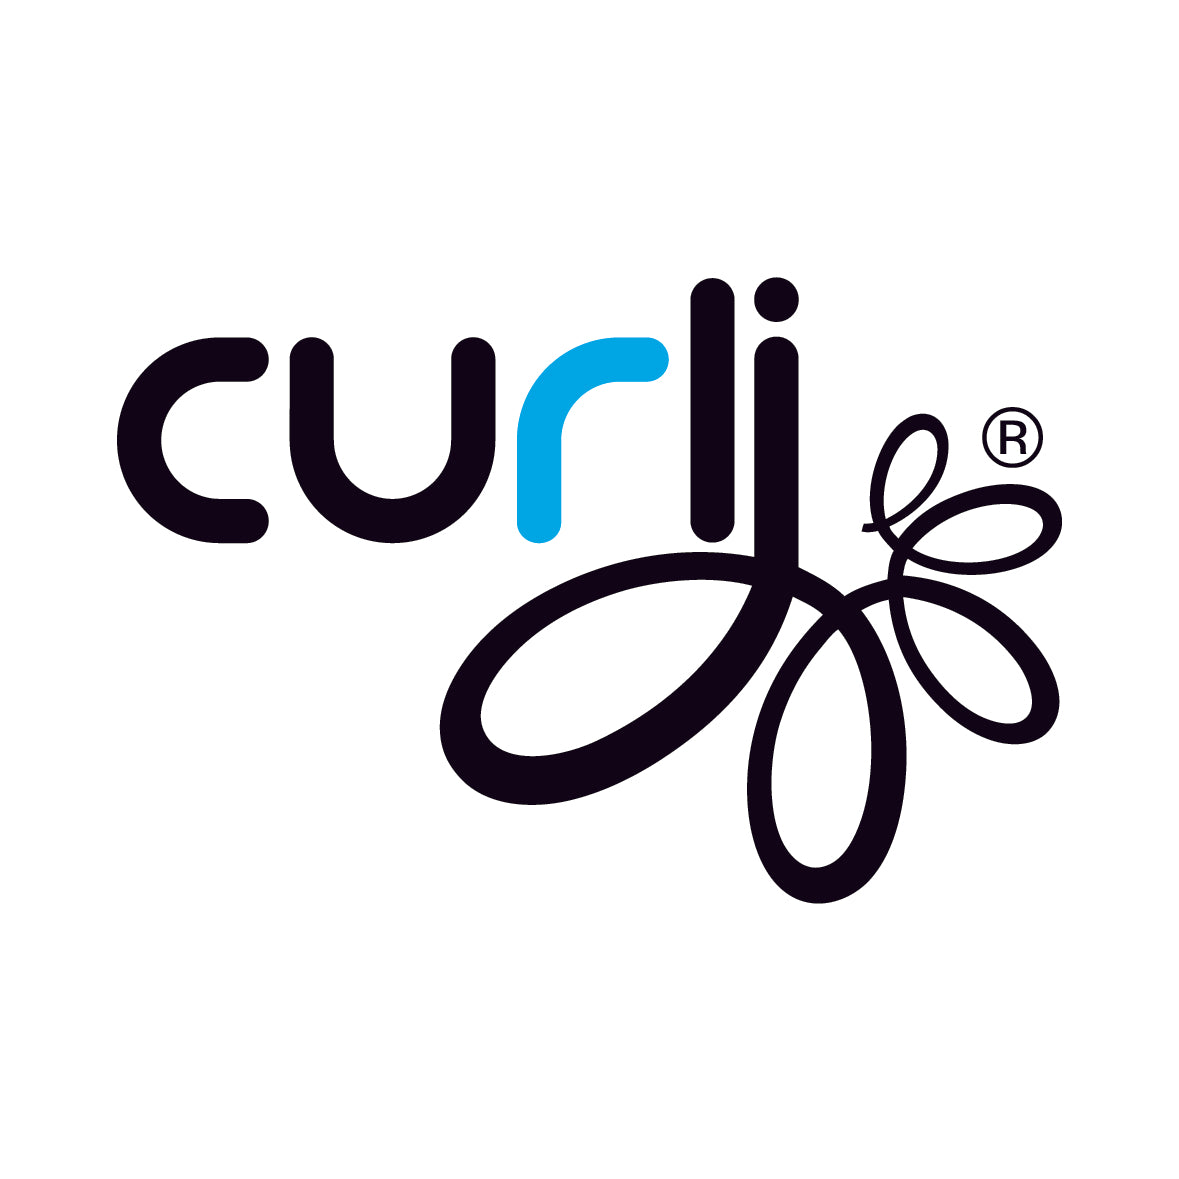 Curli Logo  image Pets Planet - South Africa’s No.1 ePet Store for premium pet products, online pet shopping, best pet store near me, dog beds, dog bed, plush dog bed, washable dog bed, fluffy dog bed, calming dog bed, takealot dog bed, iremia dog bed